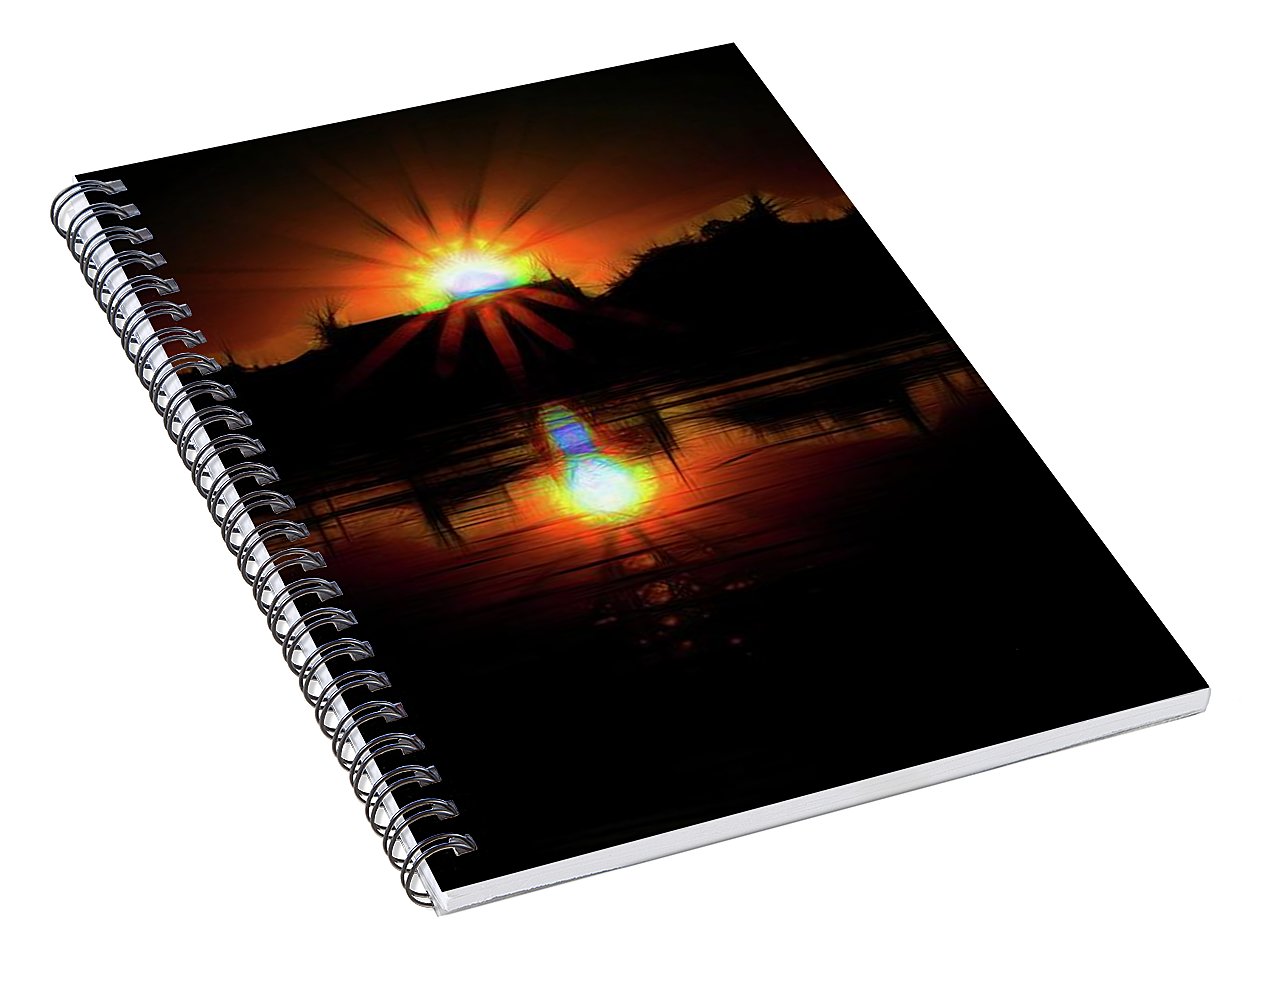 Sunset On The Wisconsin River - Spiral Notebook